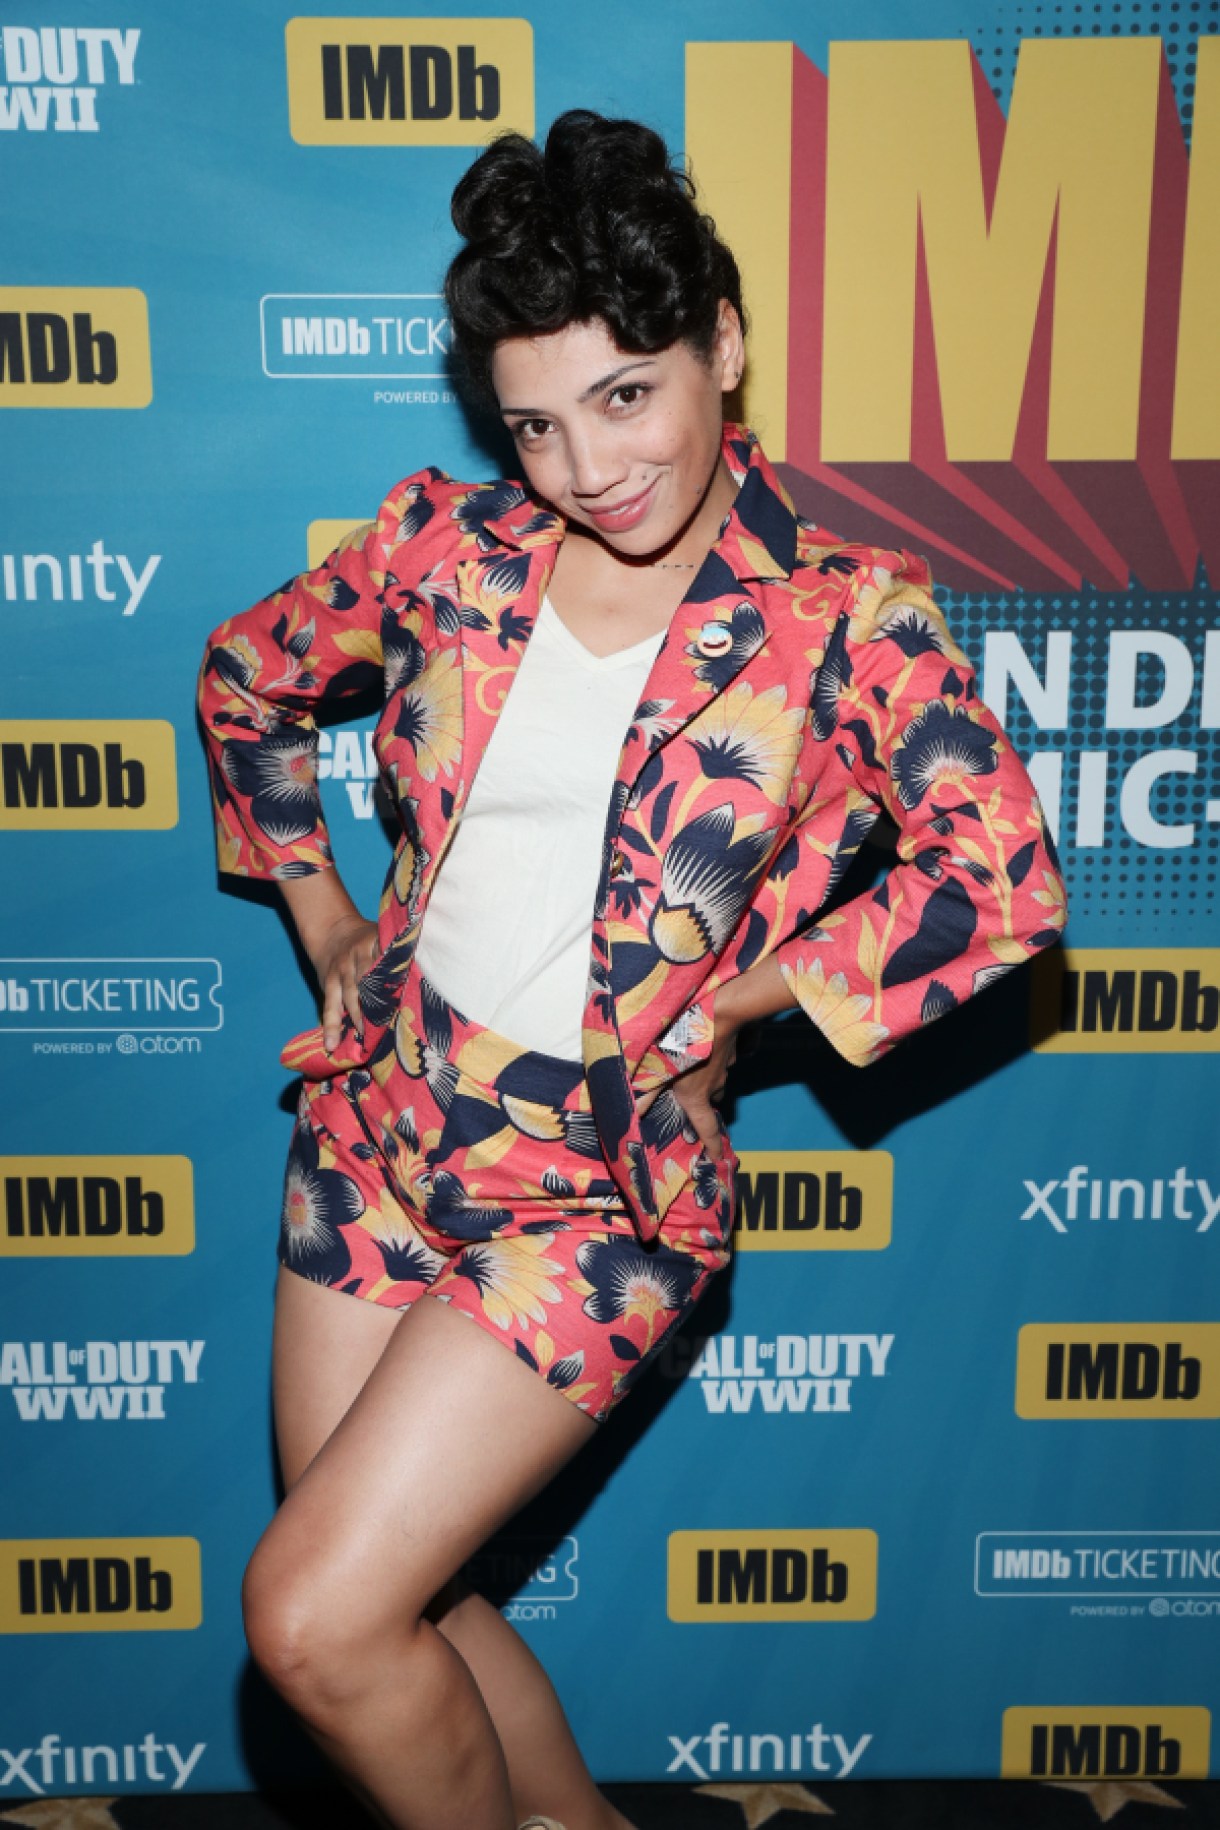 SAN DIEGO, CA - JULY 22:  Actor Jasika Nicole on the #IMDboat at San Diego Comic-Con 2017 at The IMDb Yacht on July 22, 2017 in San Diego, California.  (Photo by Rich Polk/Getty Images for IMDb)